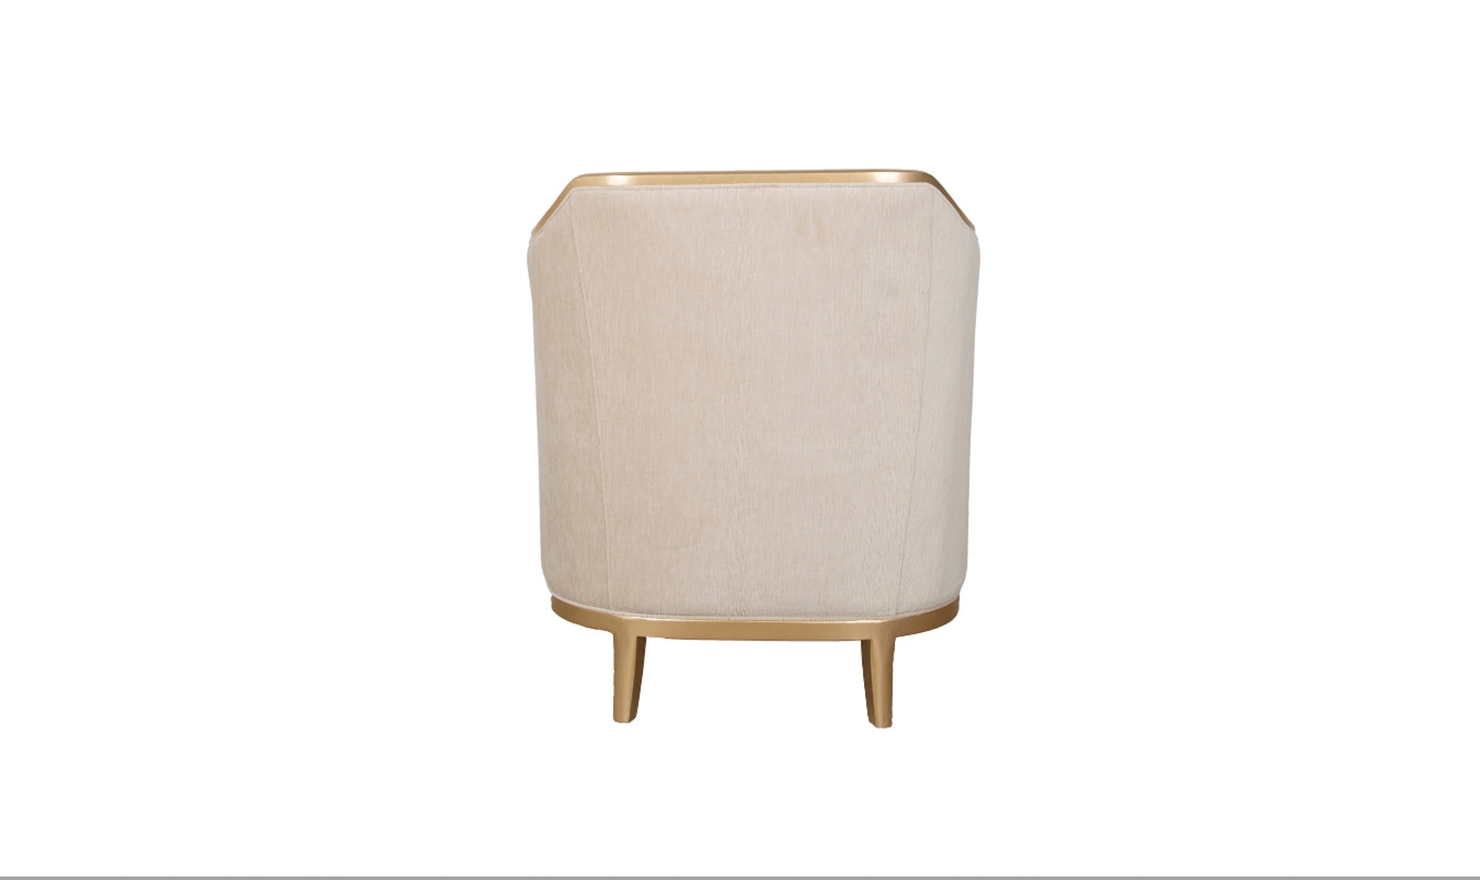 Angelina Chair with Accent Pillow